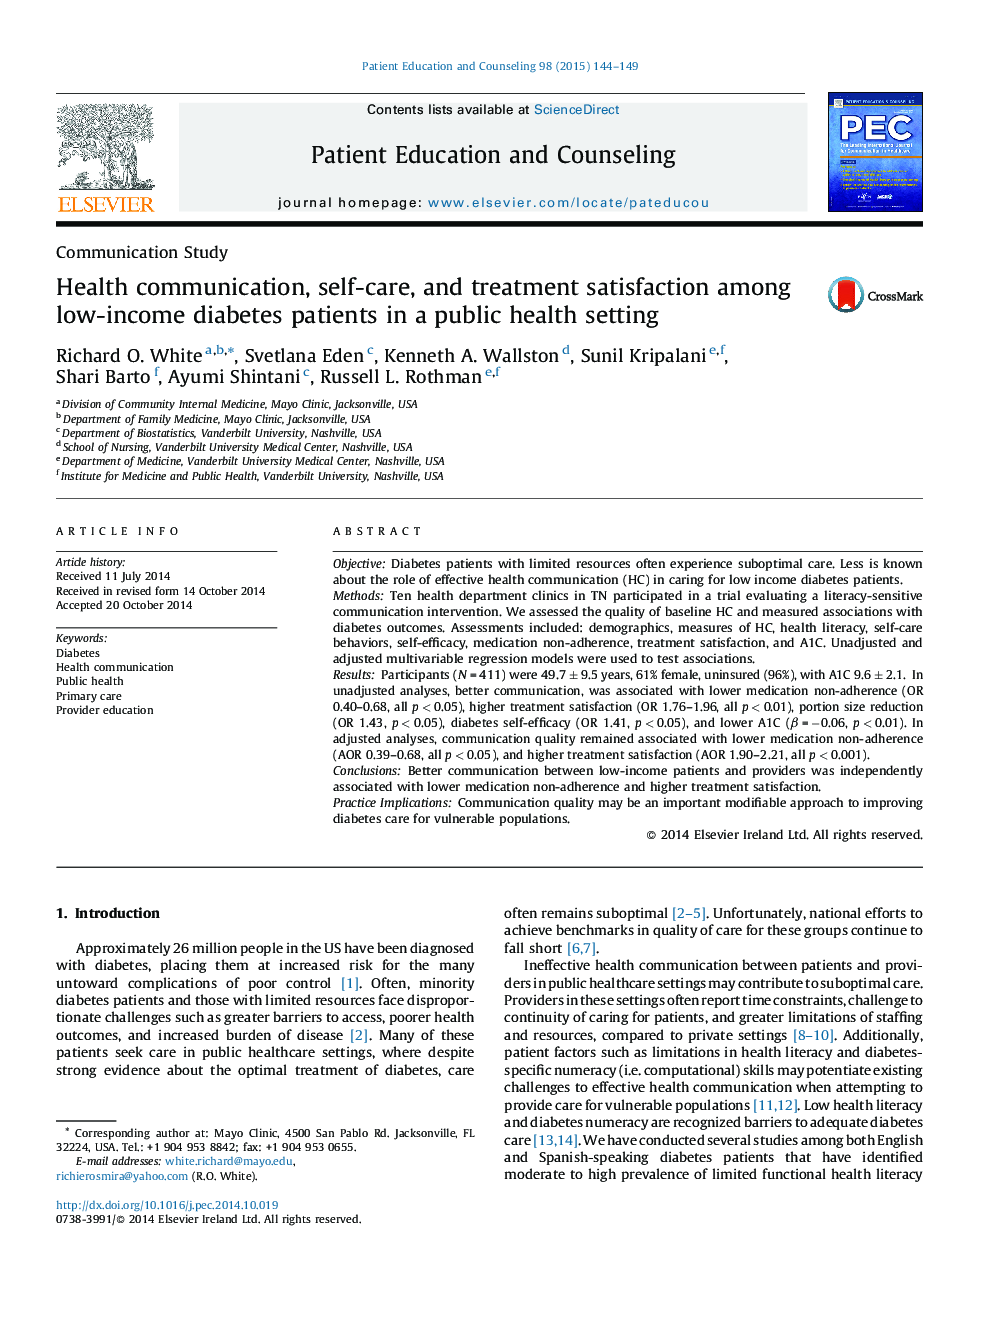 Health communication, self-care, and treatment satisfaction among low-income diabetes patients in a public health setting